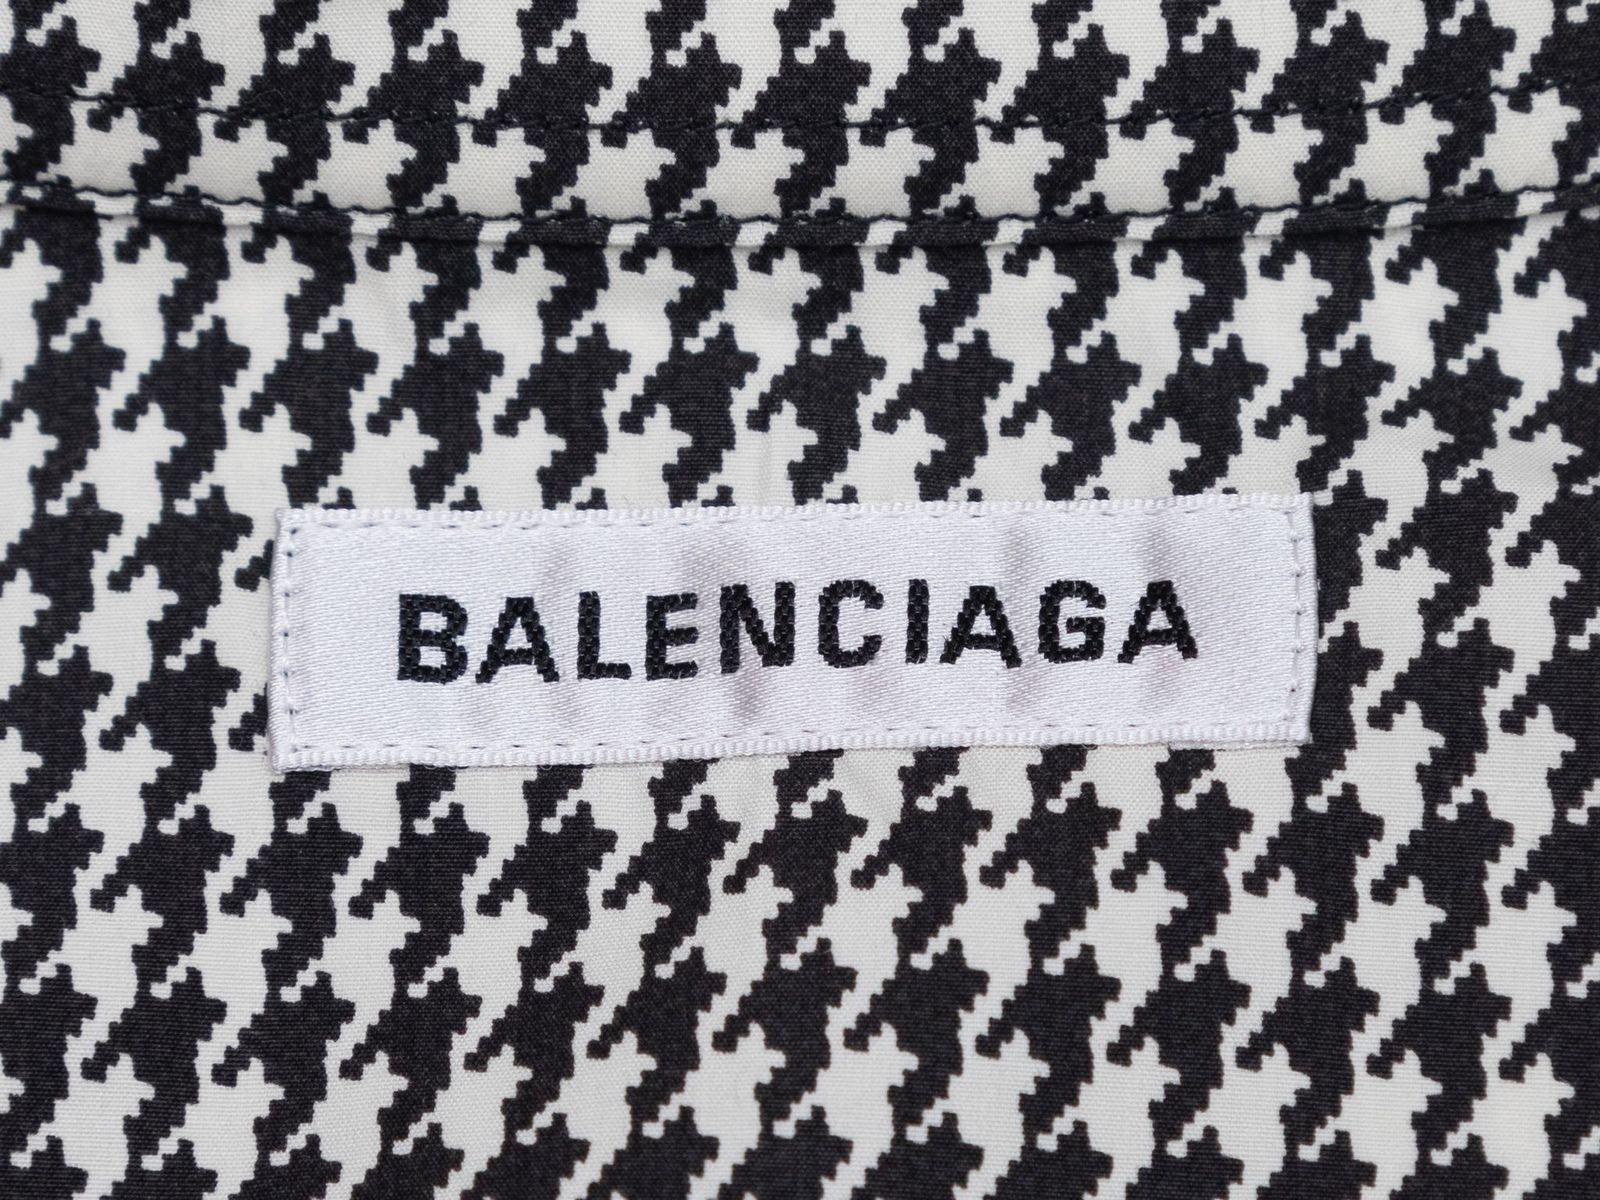 Product Details: Black and white houndstooth print long sleeve button-up top by Balenciaga. Pointed collar. Button closures at center front. Designer size 34. 50